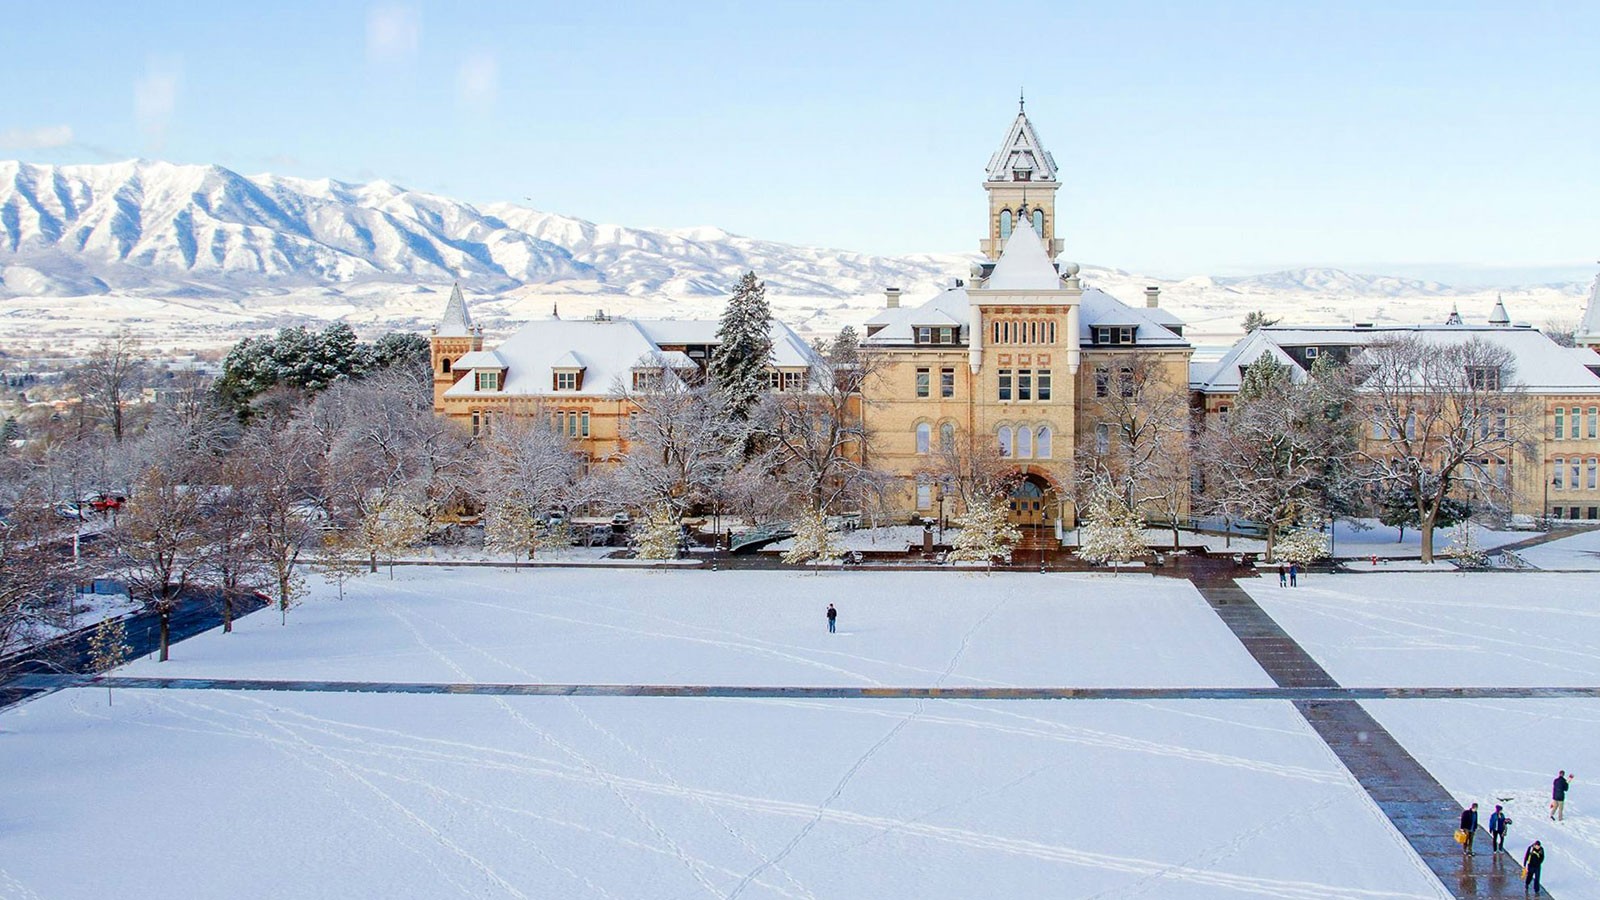 USU President to Give 2022 State of the University Address